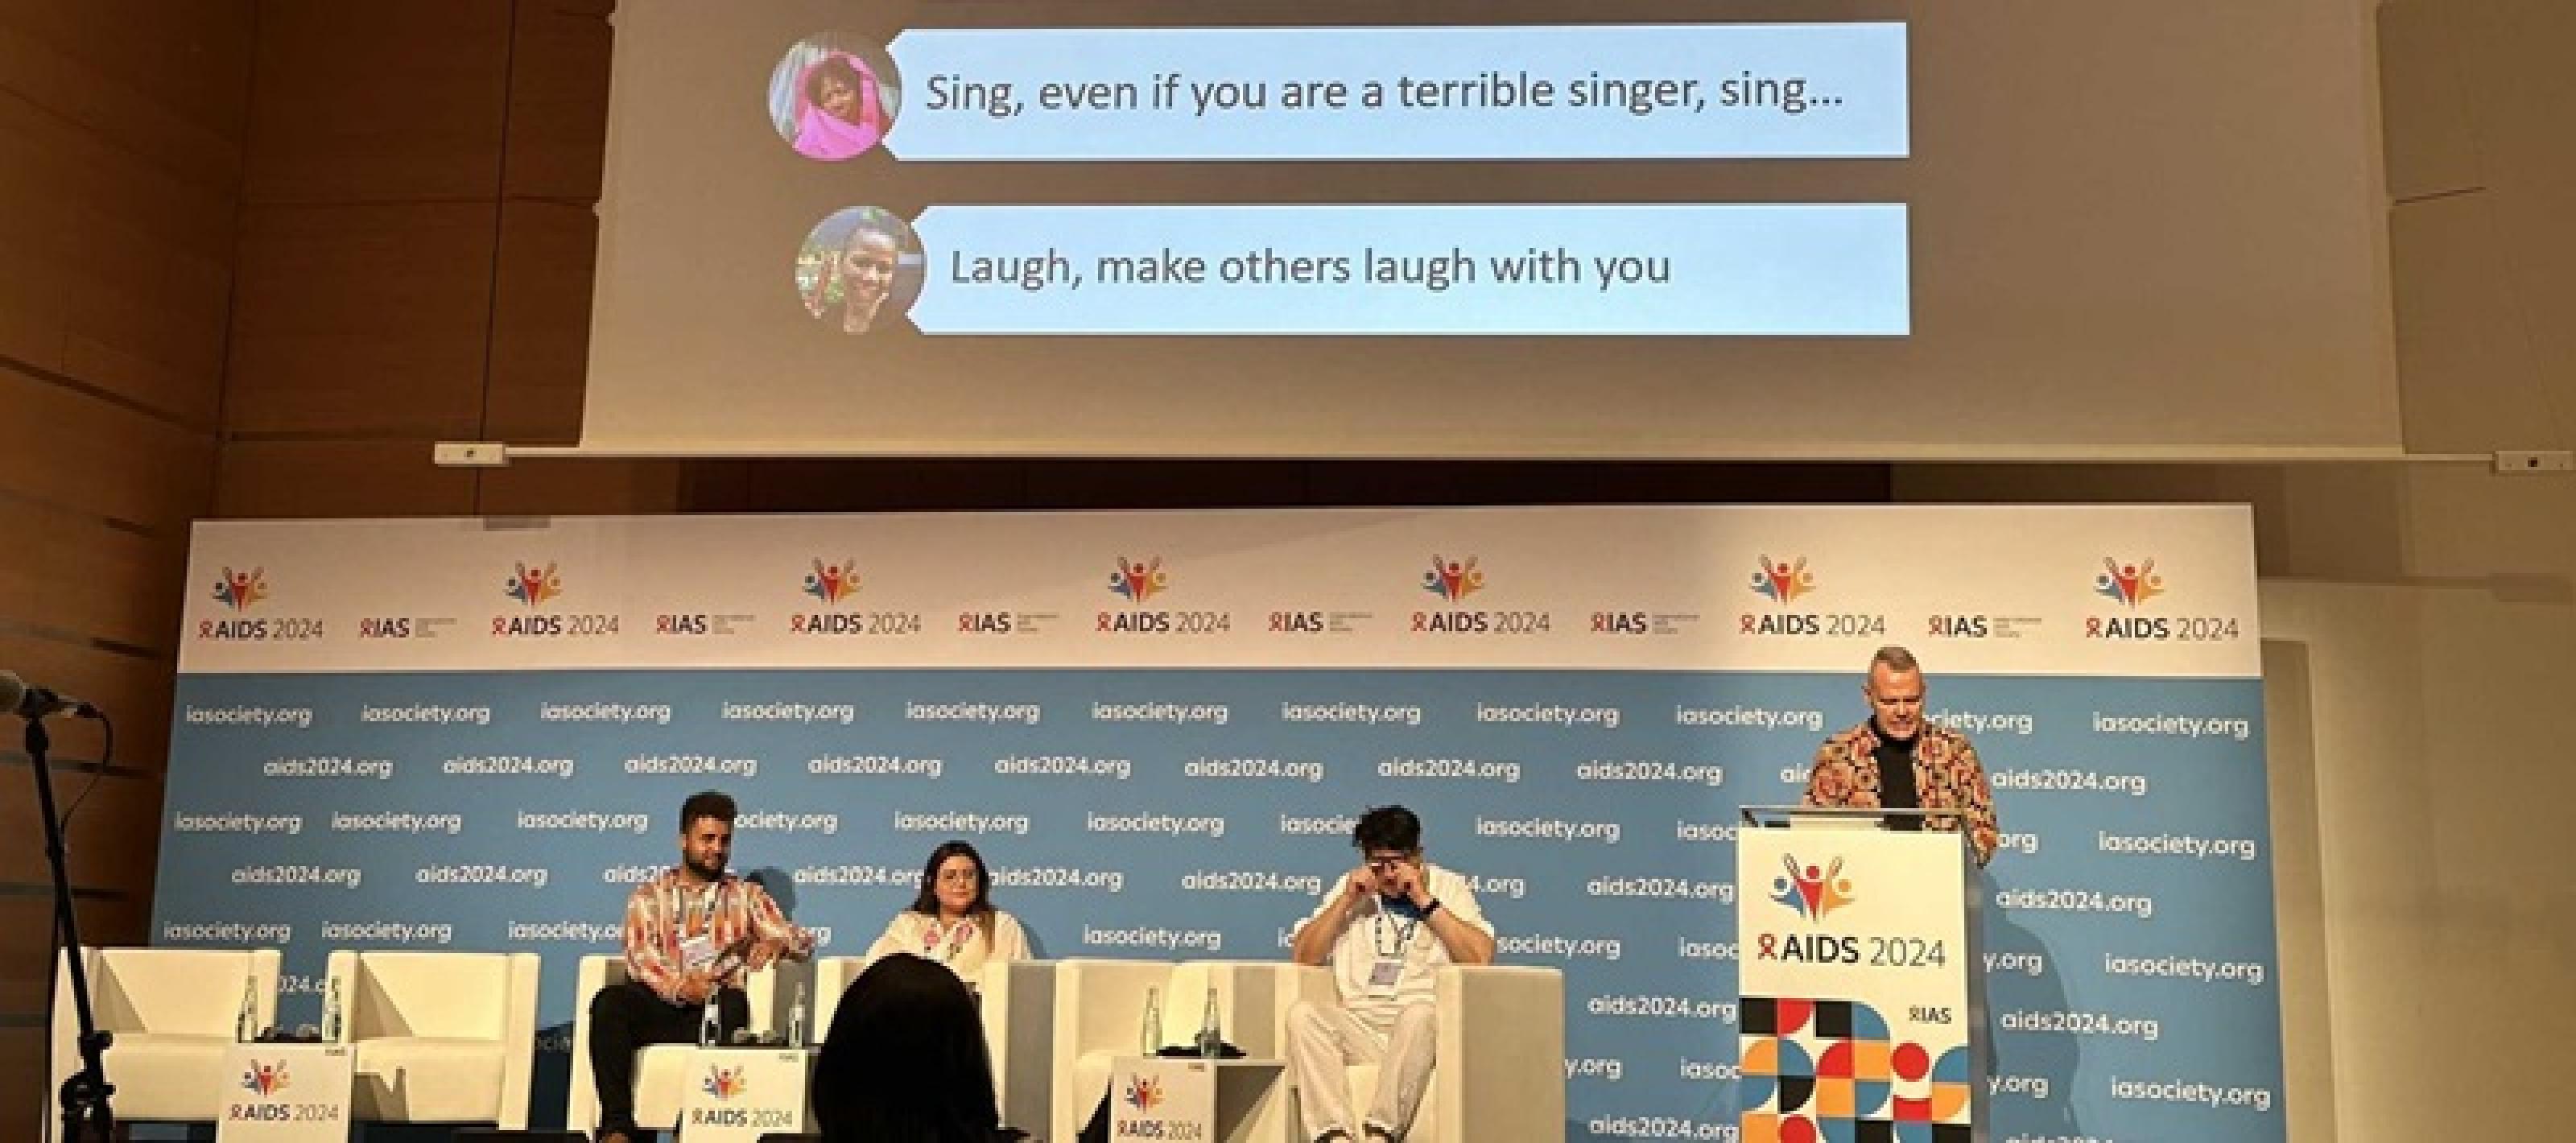 Workshop Zero HIV Stigma Day: Podium mit Präsentation "Sing even if you are a terrible singer, sing - Laugh, make others laugh with you" 